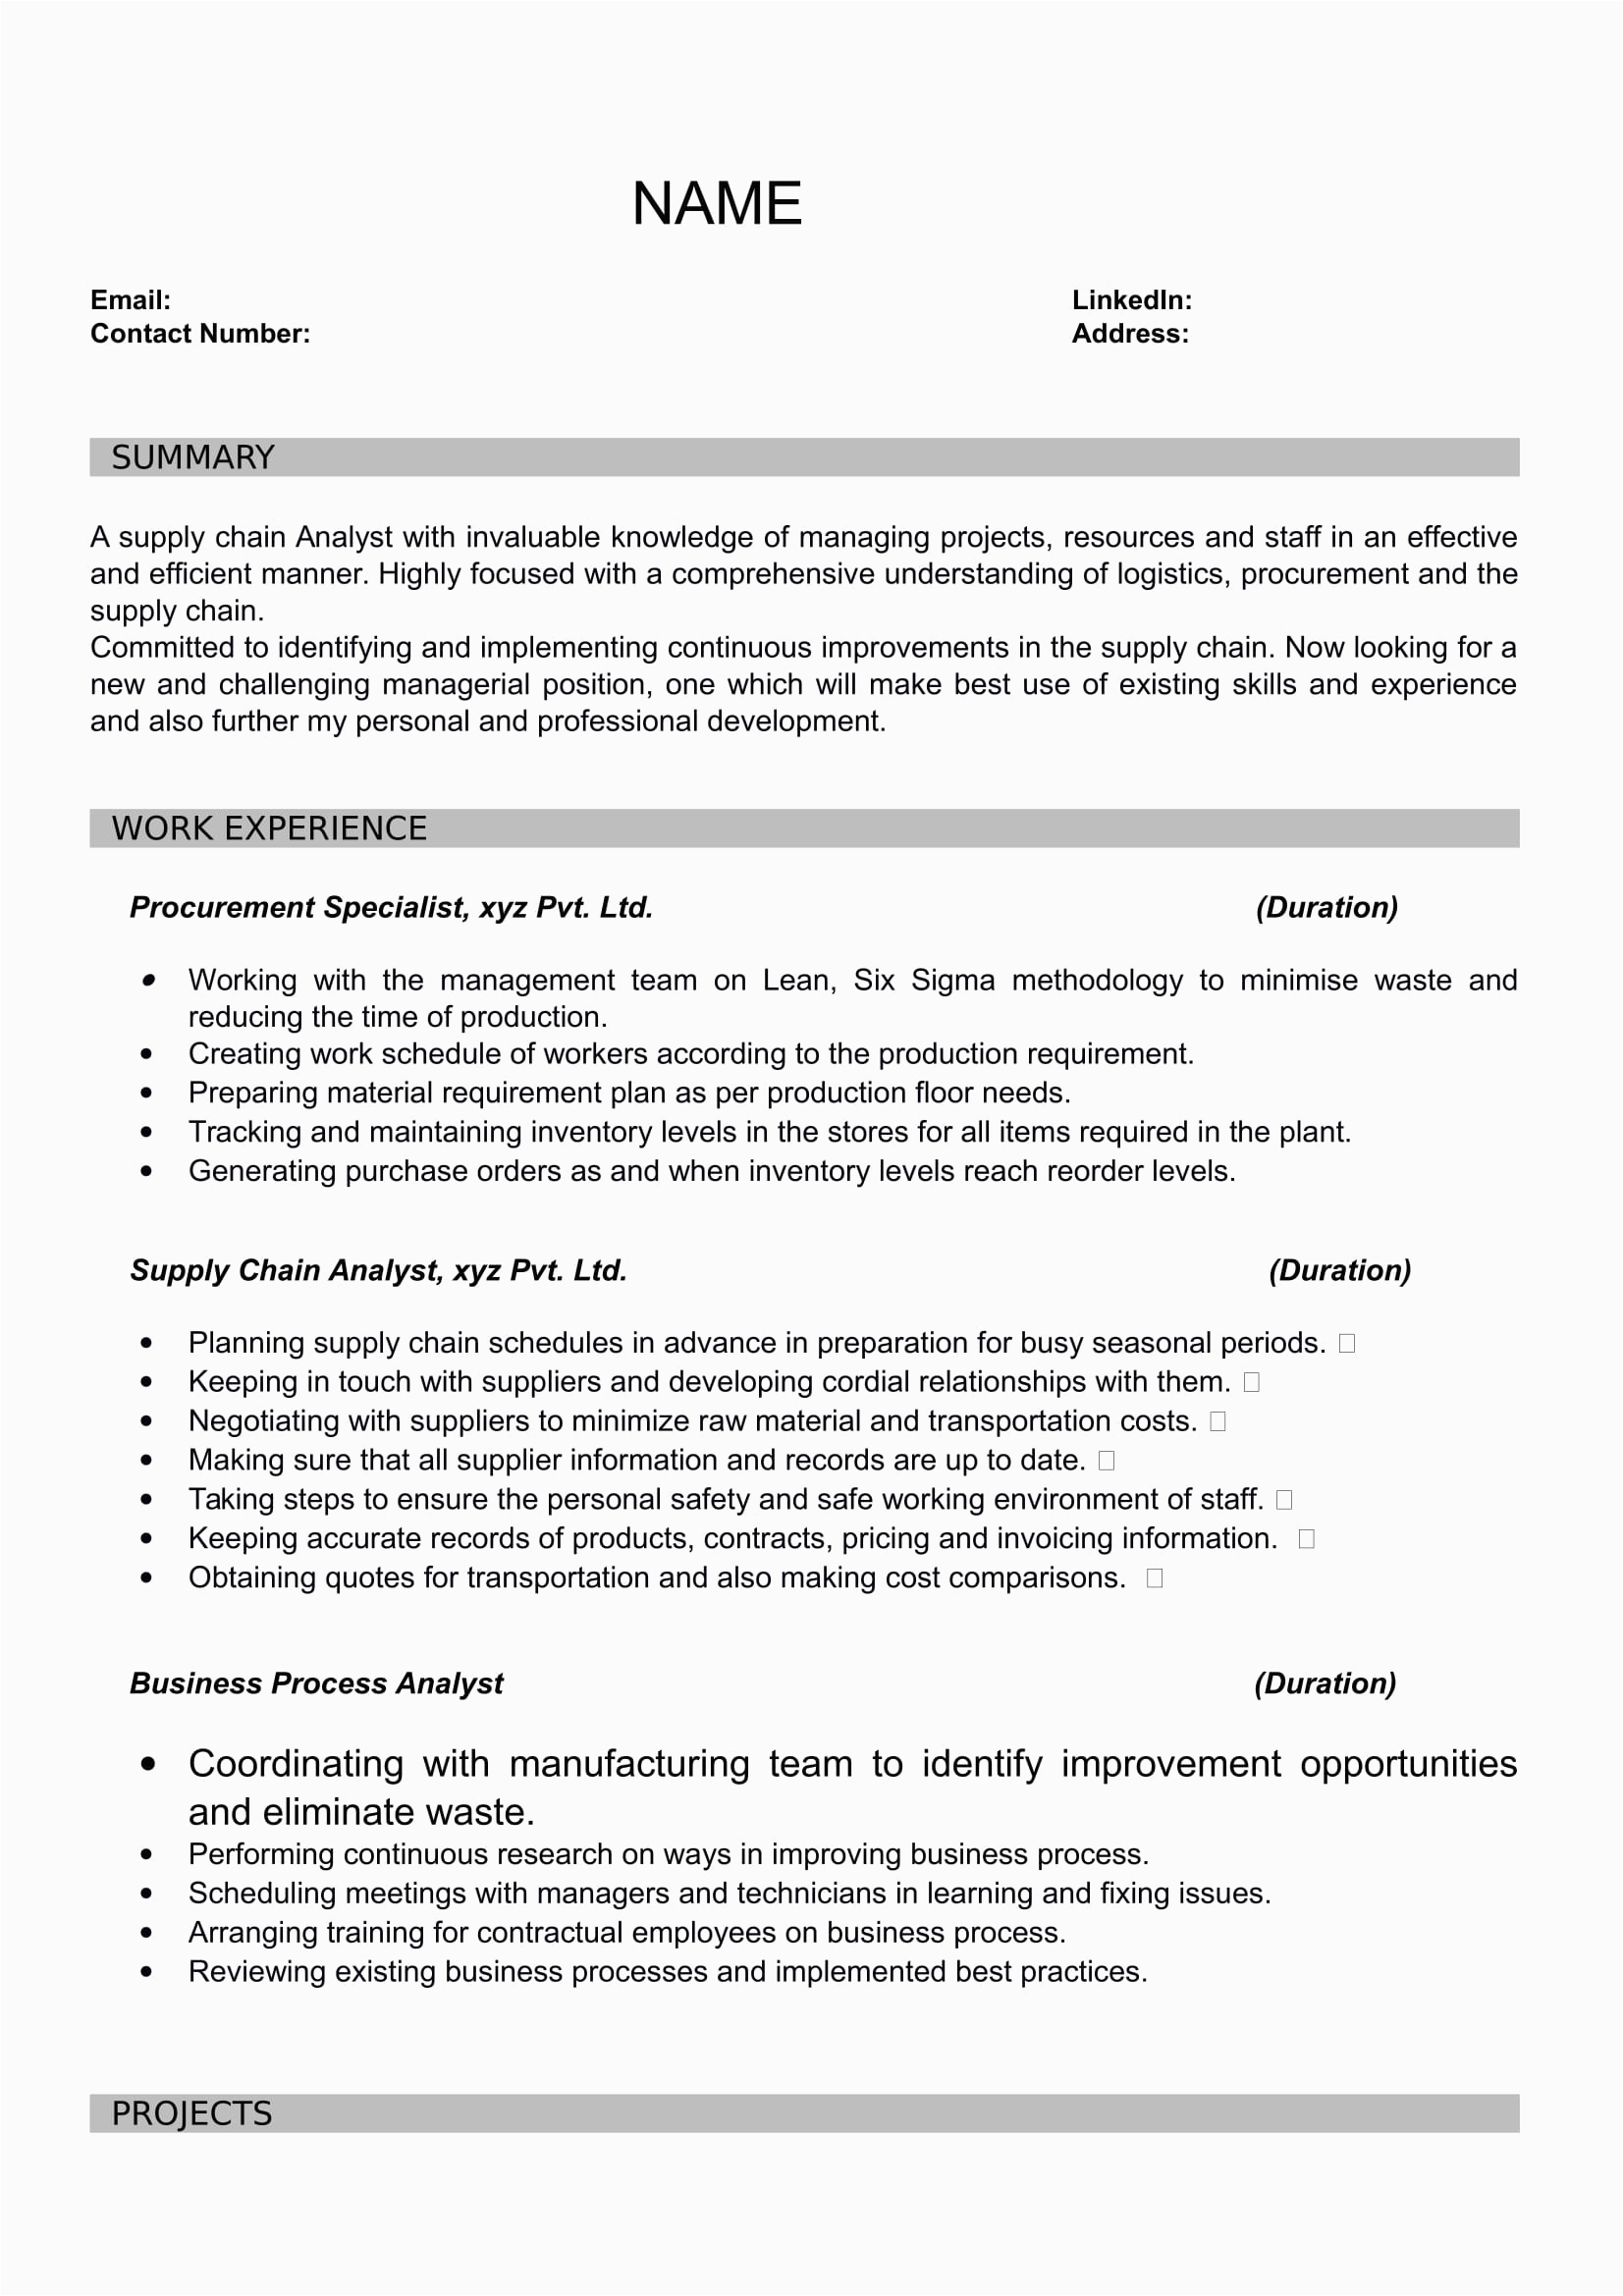 Resume Samples for Freshers Mba In Marketing Resume Templates for Mba Freshers Download Free